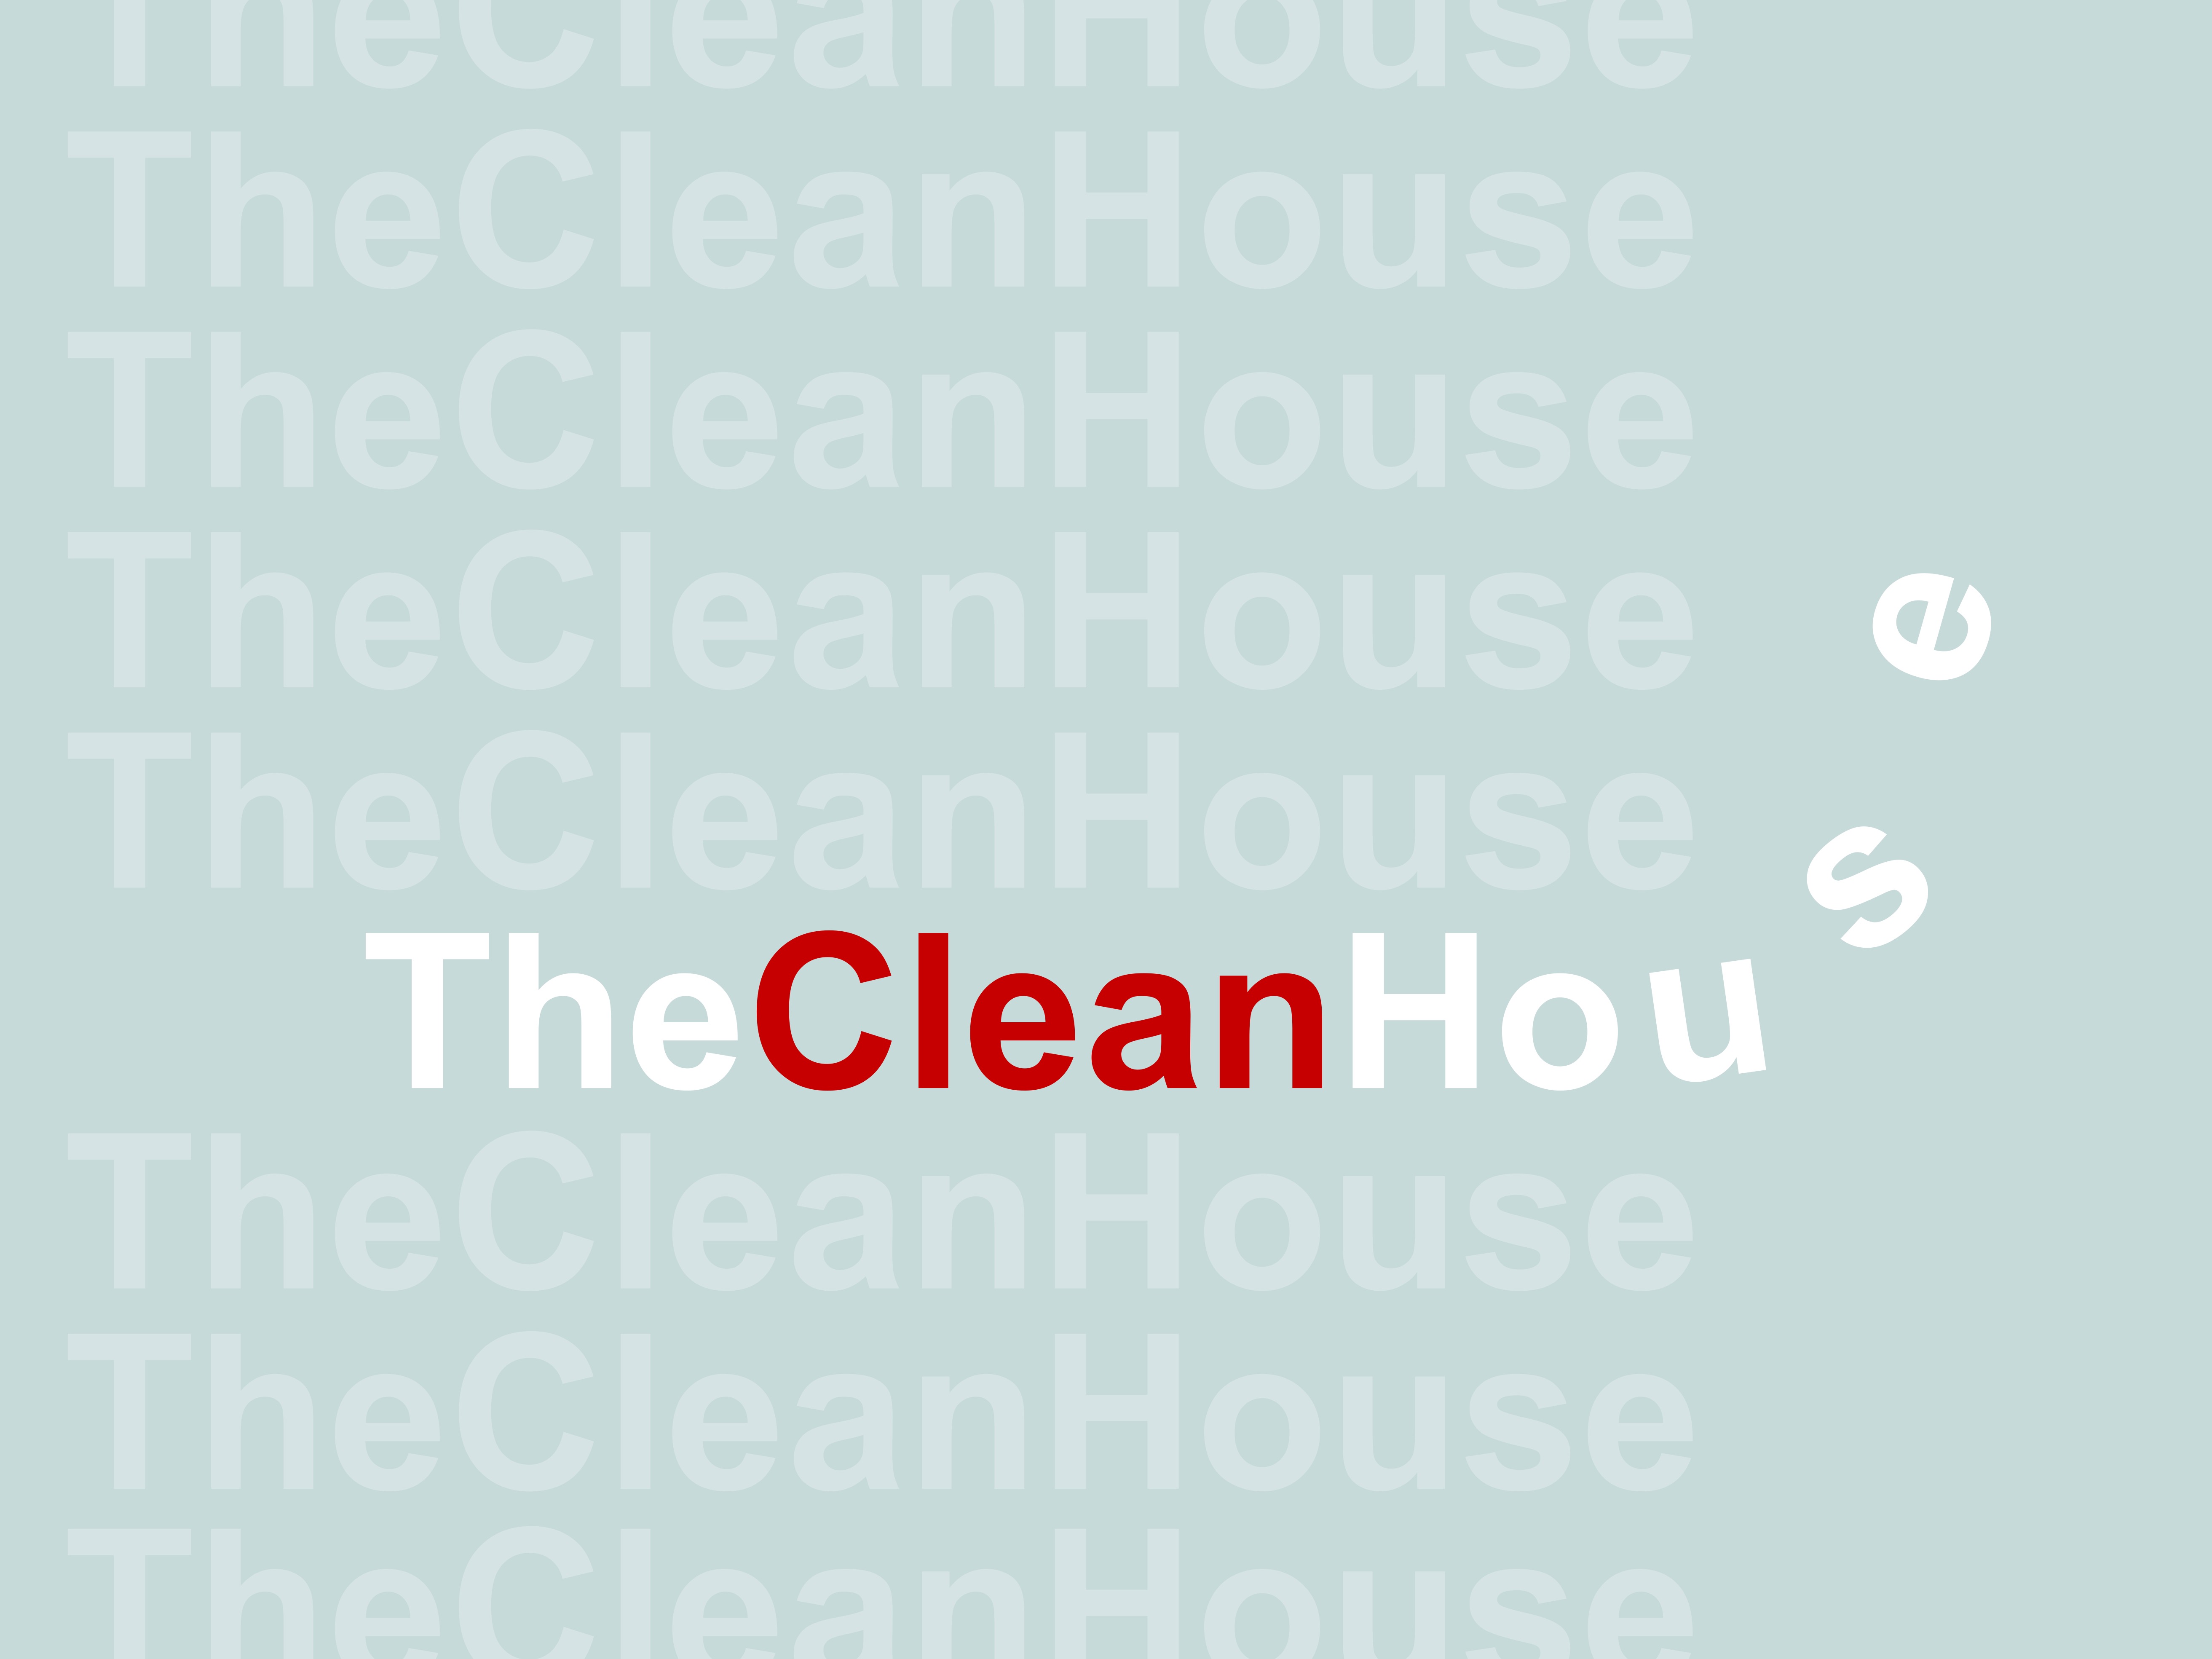 Clean house graphic